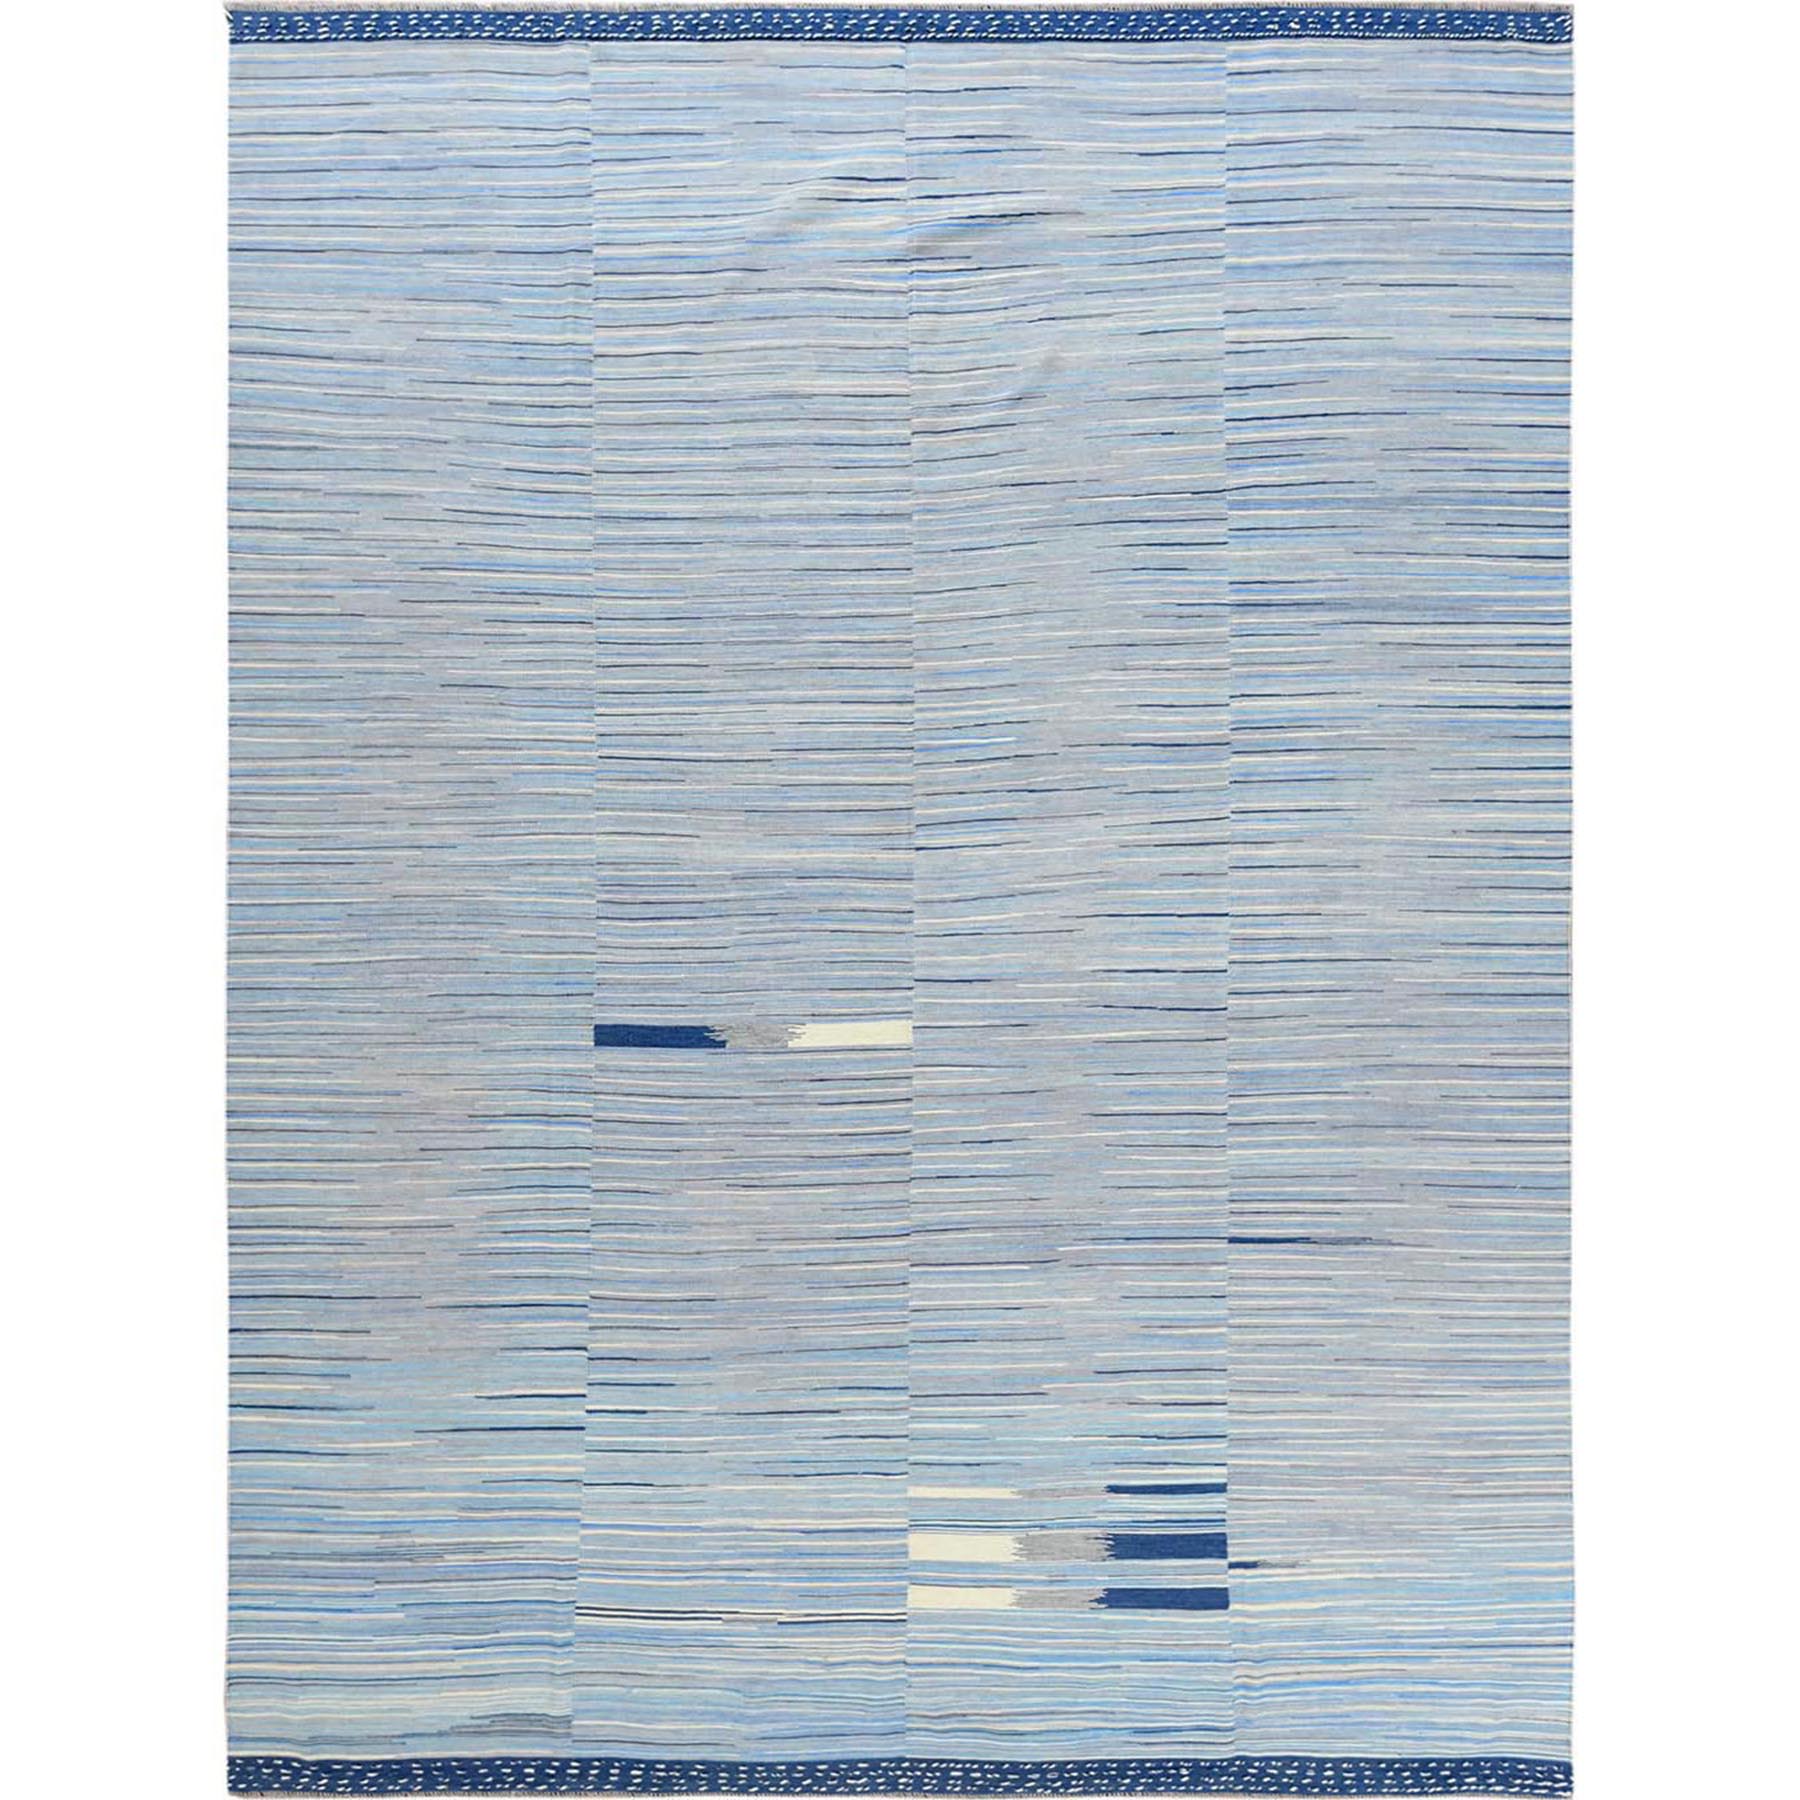 Modern & Contemporary Wool Hand-Woven Area Rug 10'5